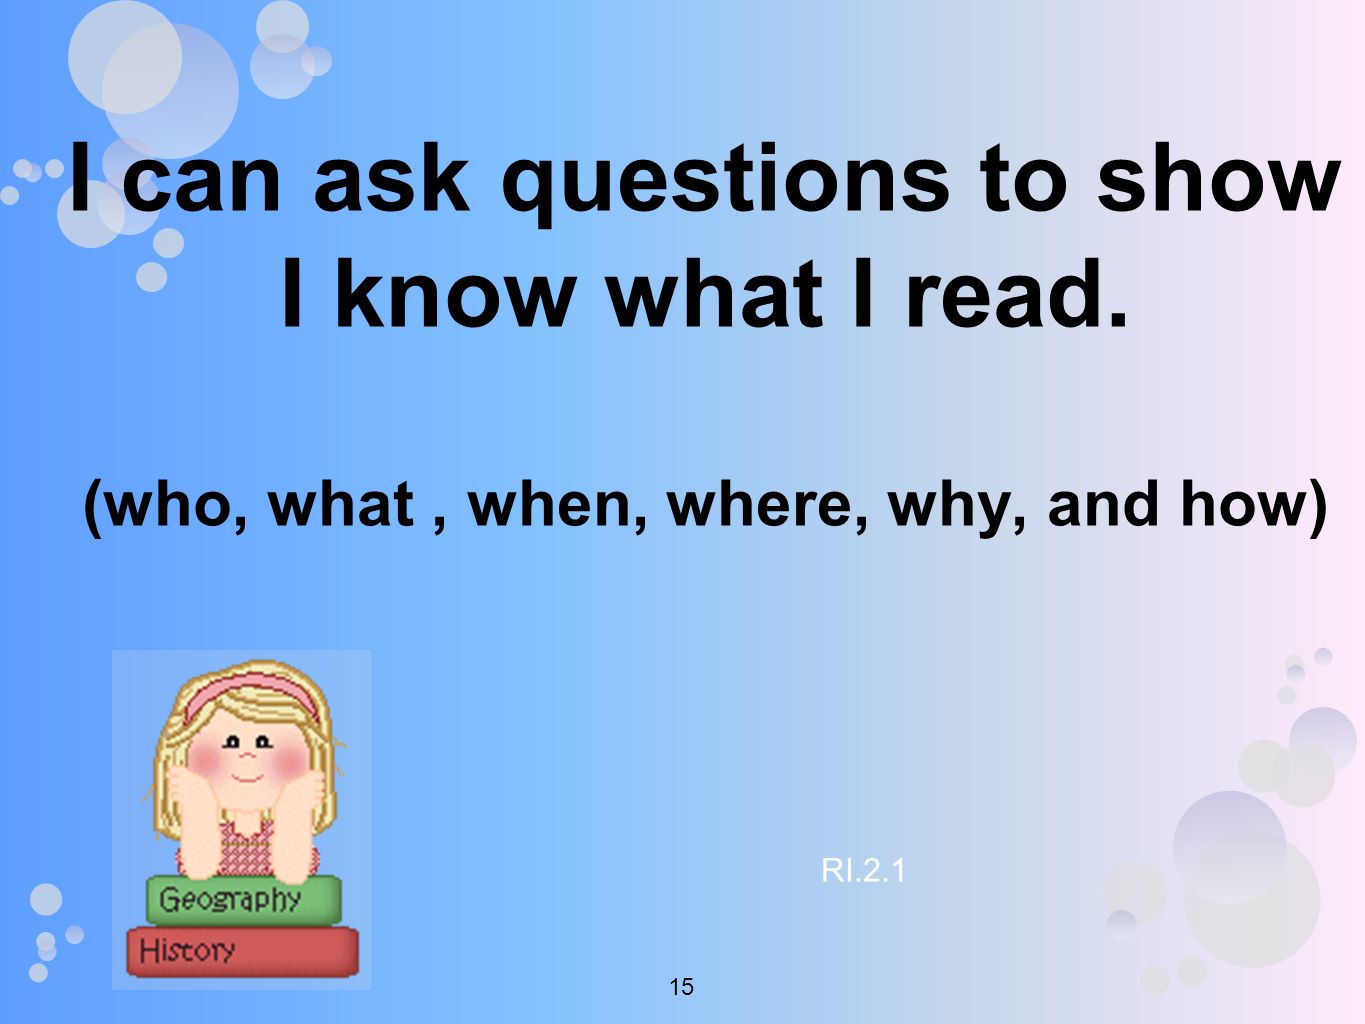 I can ask questions to show I know what I read. (who, what, when, where, why, and how) RI